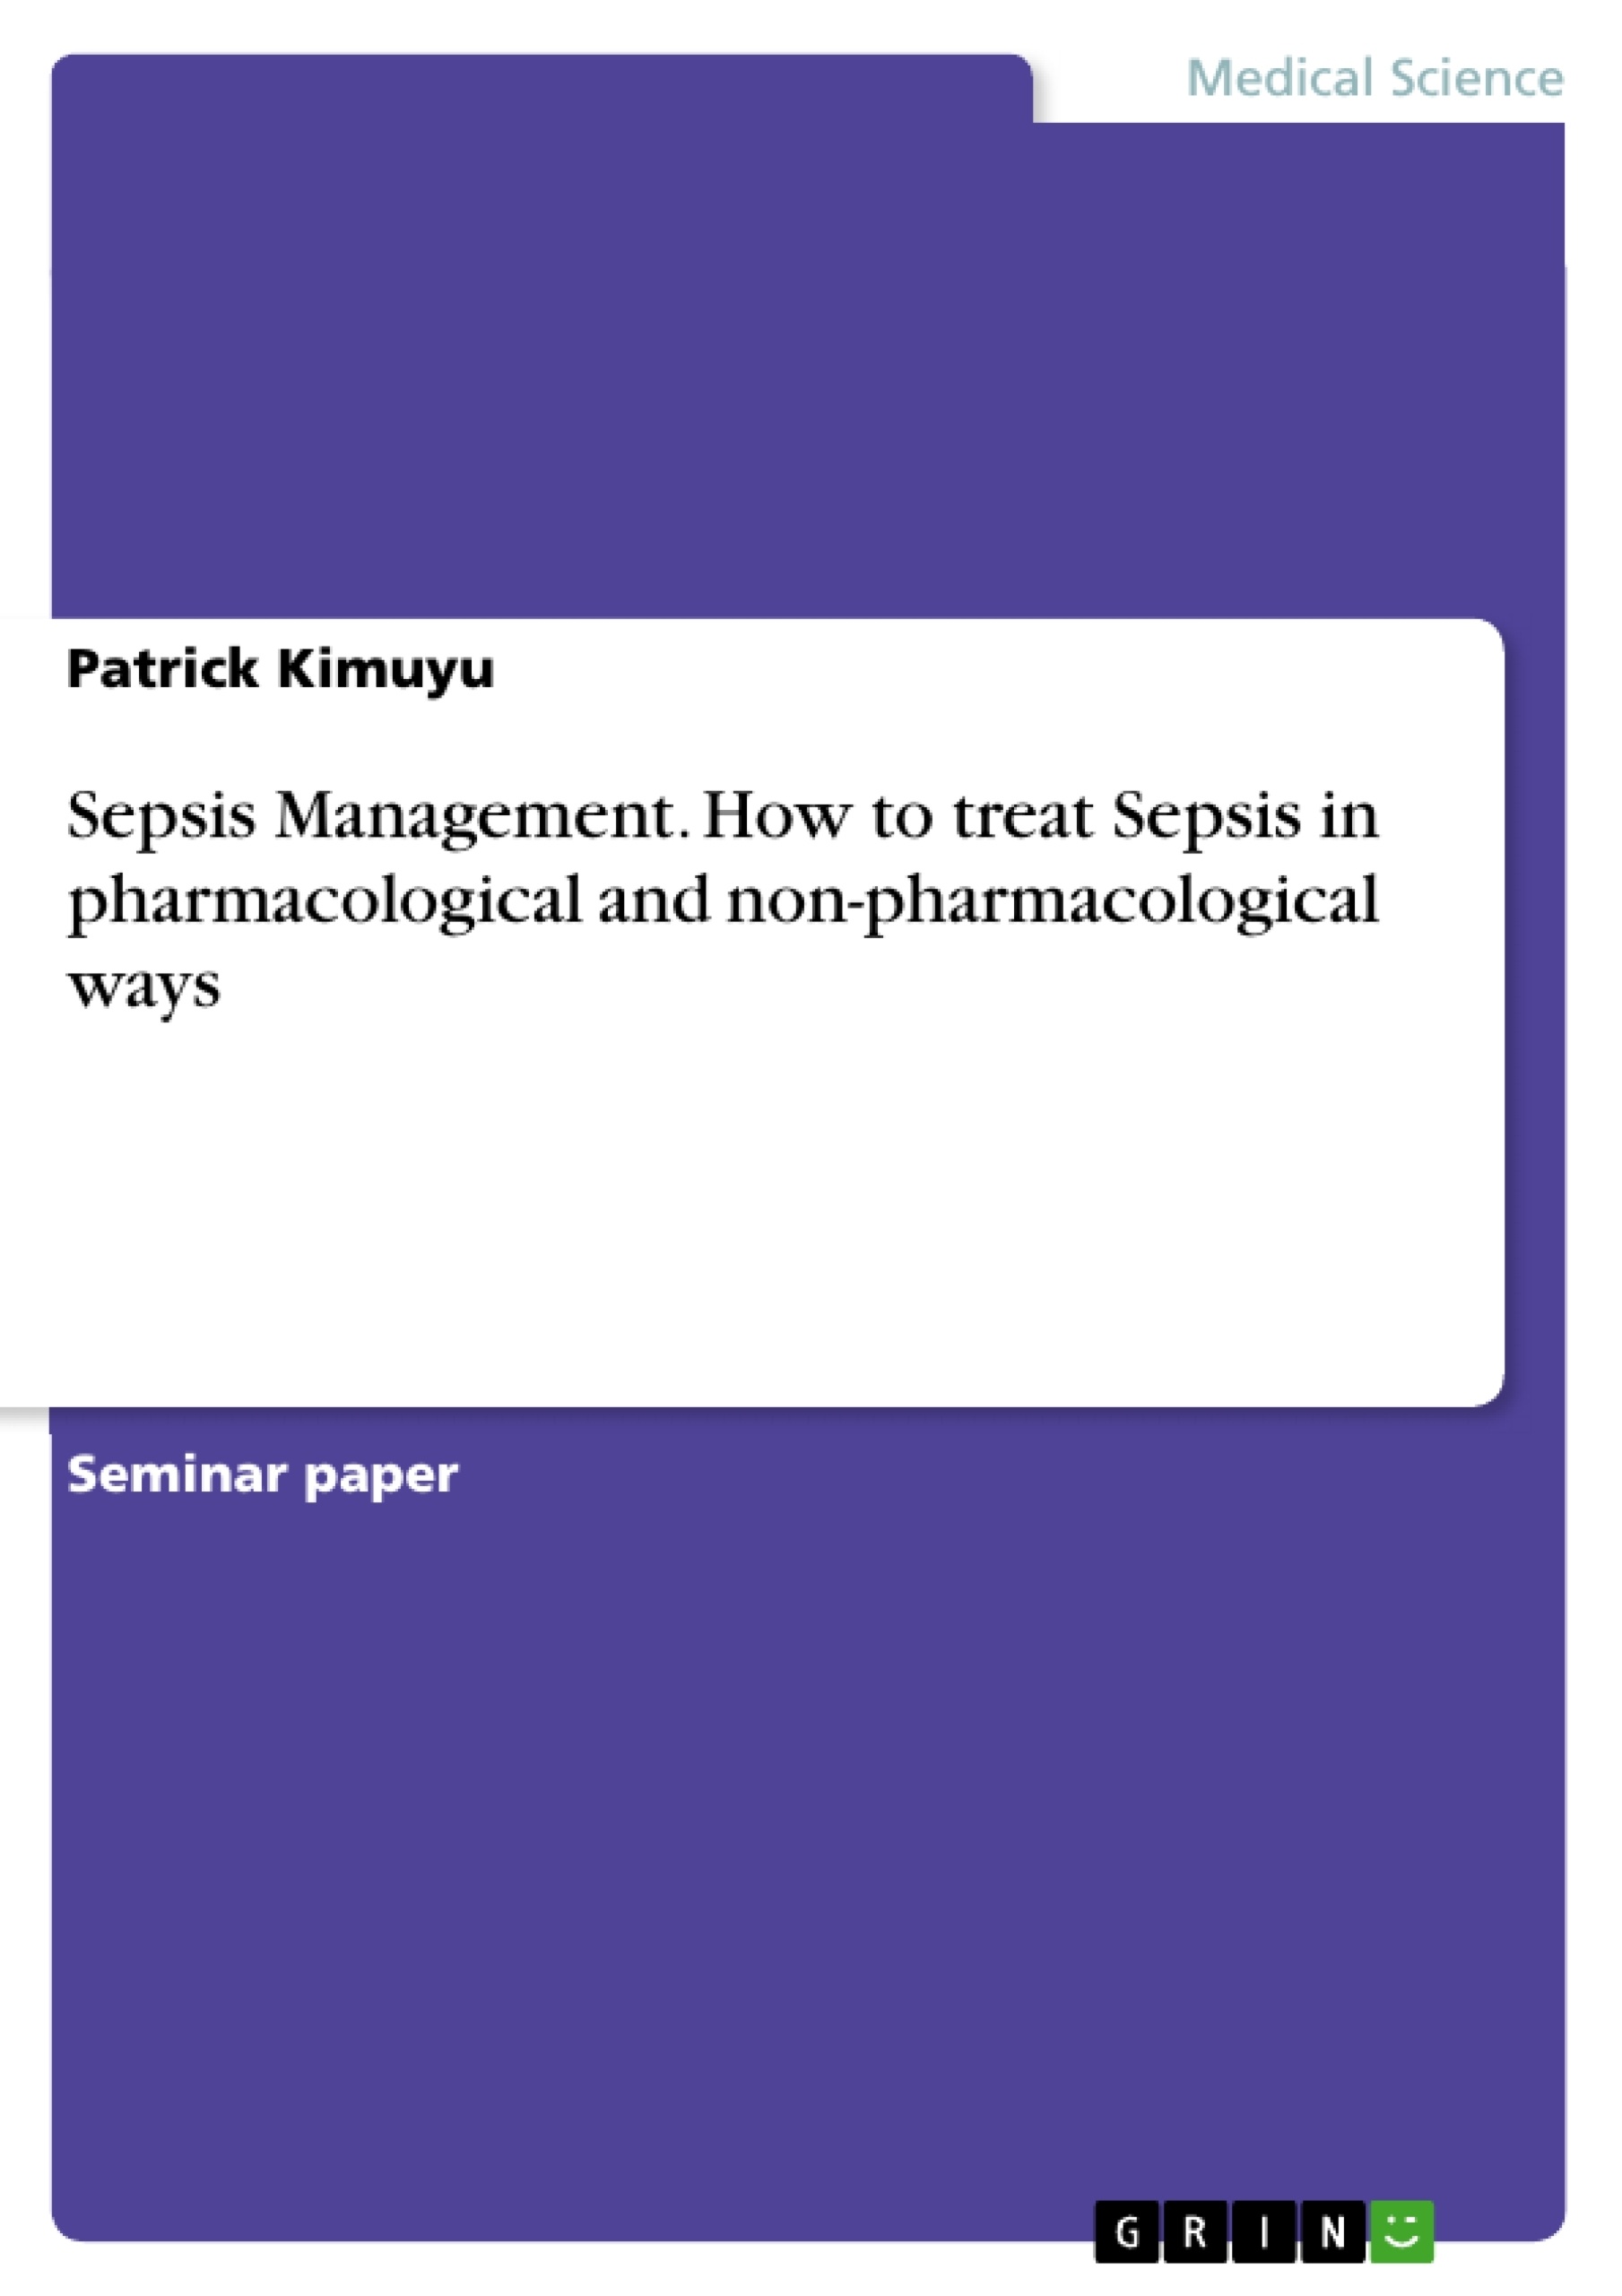 Título: Sepsis Management. How to treat Sepsis in pharmacological and non-pharmacological ways